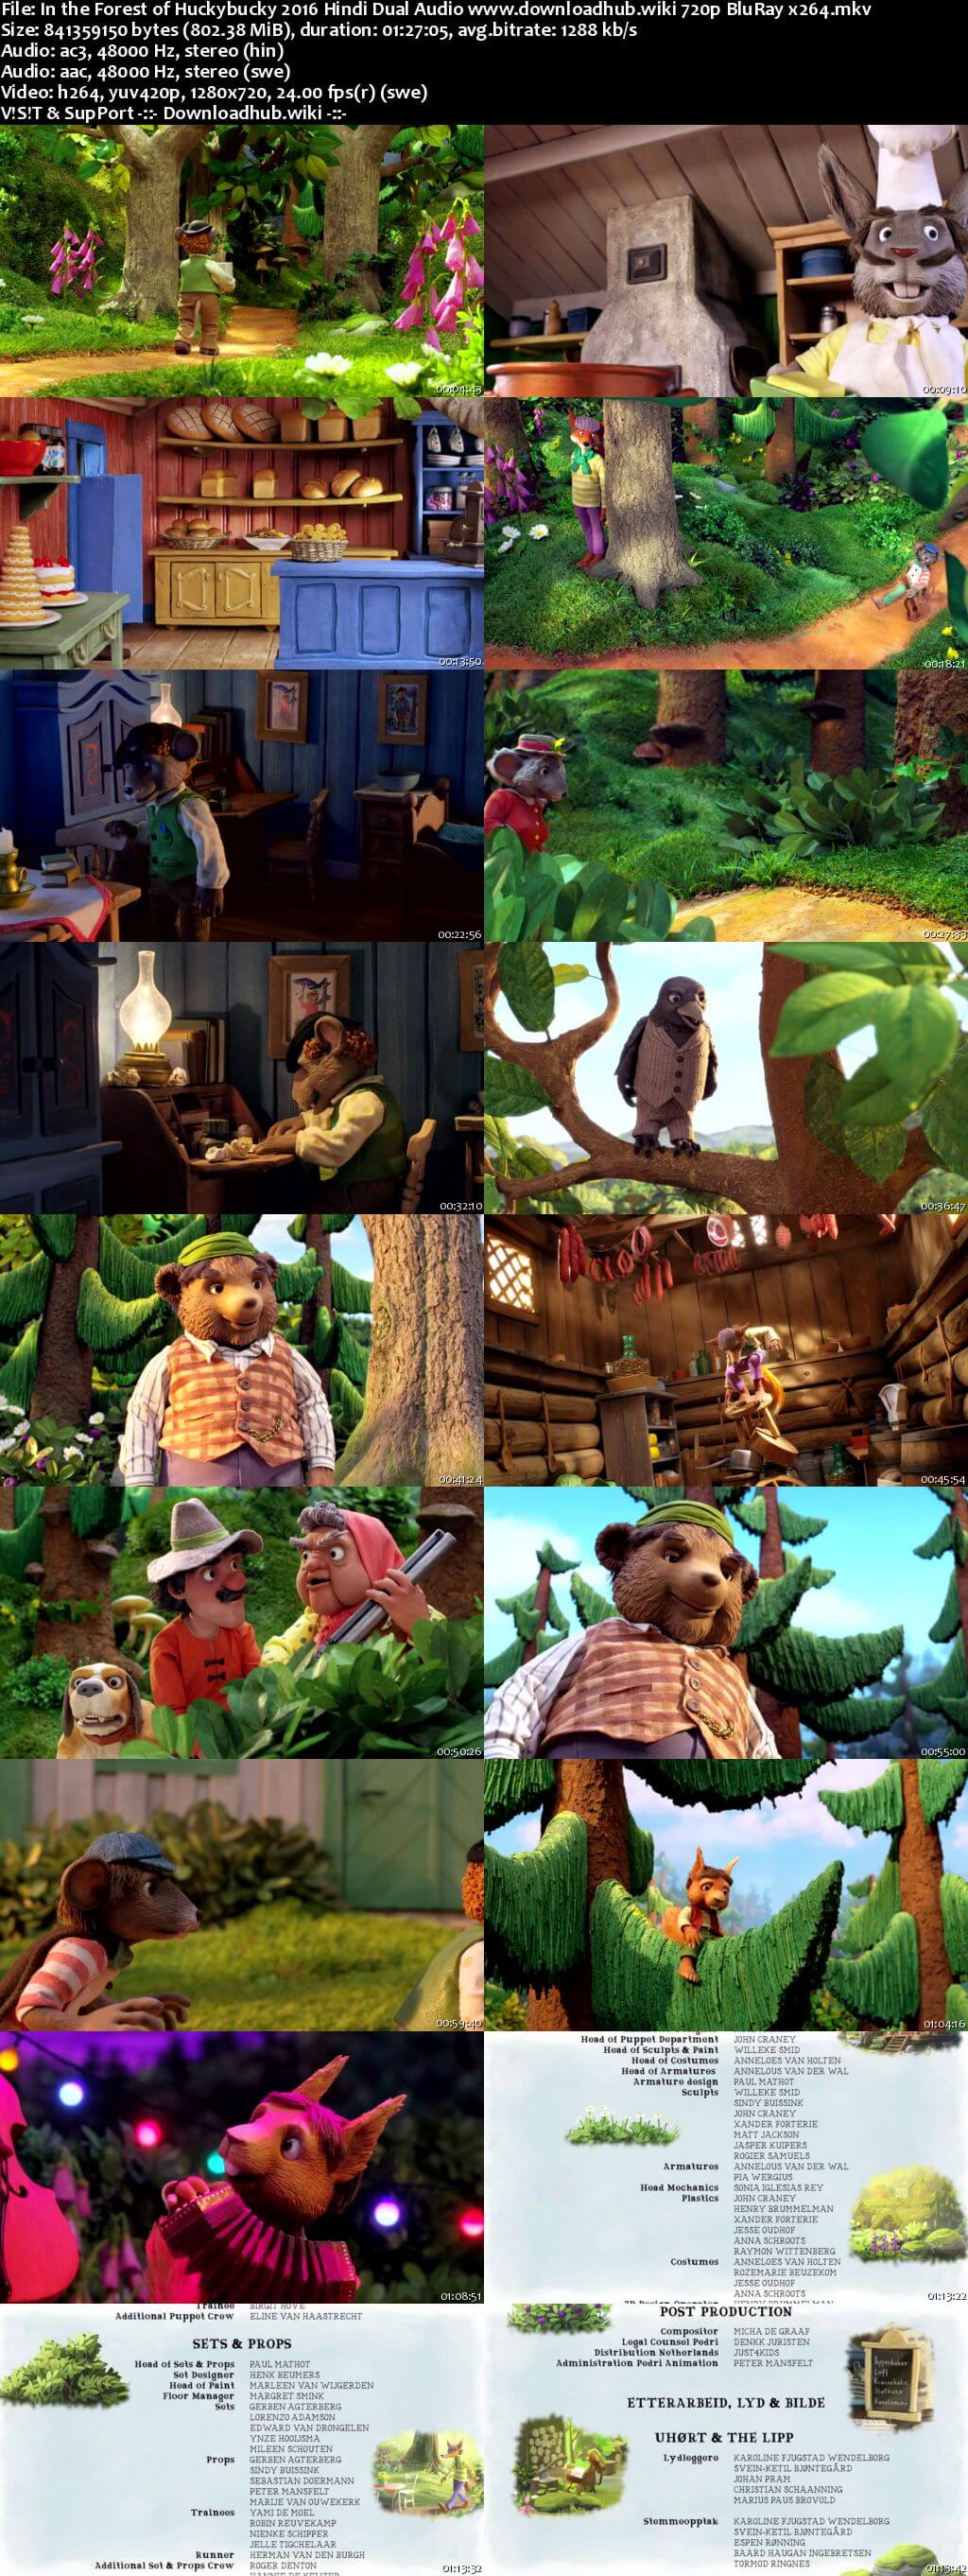 In The Forest Of Huckybucky 16 Hindi Dual Audio 7p Bluray X264 Downloadhub